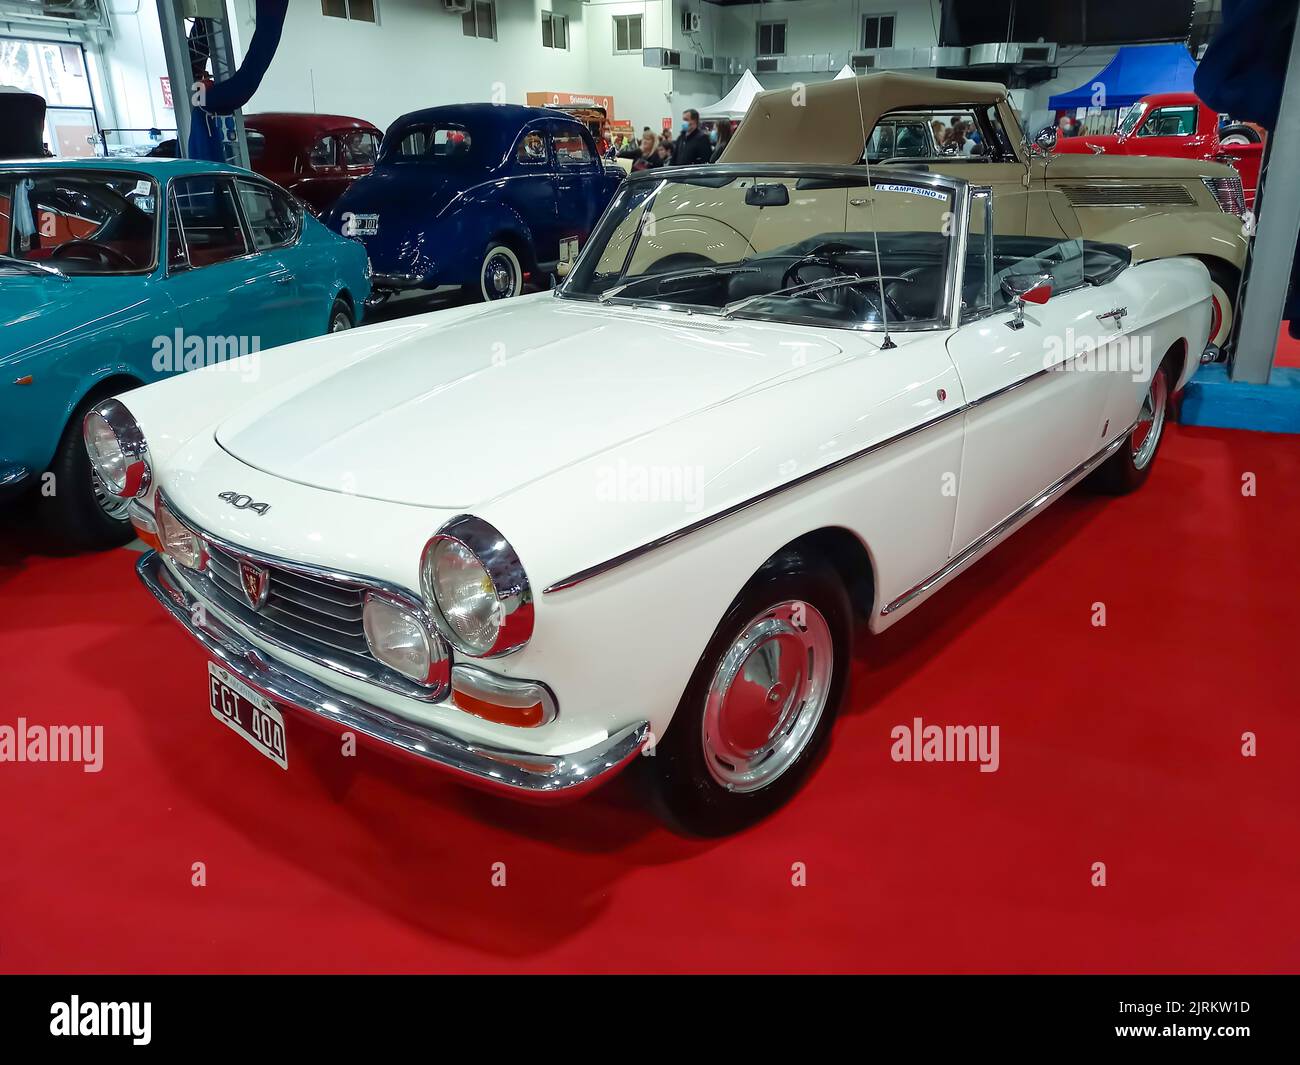 Berazategui, Argentina - Jul 22, 2022: Old white 1975 Peugeot 404 cabriolet convertible on the red carpet. Exhibit hall. Classic car show Stock Photo